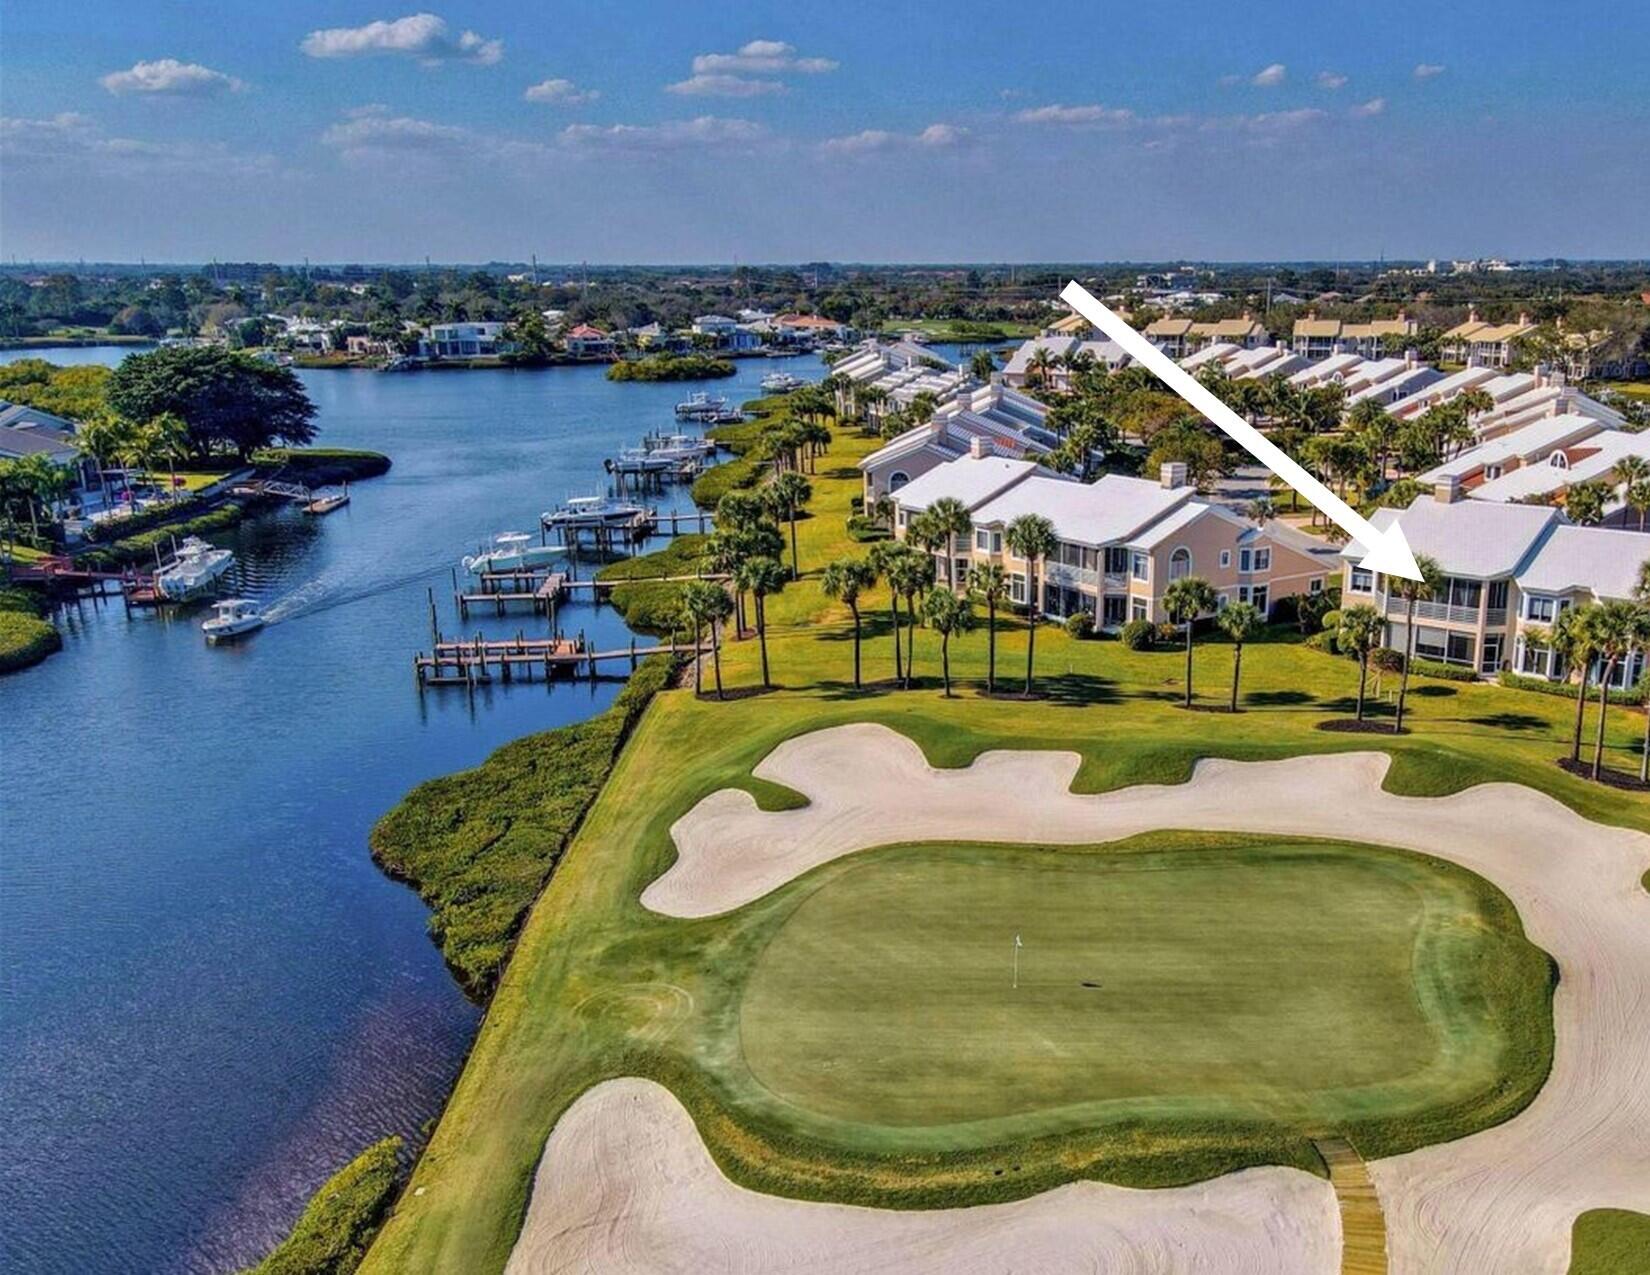 The BEST WATERFRONT & GOLF VIEWS with SE Exposure from this 2 bedroom, 2470 AC sq ft Harbor home with private dock in Admirals Cove. This is a RARE/PREMIER LOCATION within Admirals Cove, just STEPS AWAY from THE CLUB and all the amenities!   This harbor home is one of the largest floor plans to include AC screen room.  It's all light and bright with open floor concept with beautiful views from every room.   This residence features volume ceilings, white wood cabinets, new quartz counters, SS appliances, renovated bathrooms, new fixtures, and ceramic gray tile throughout living area.  Other features include expansive balcony overlooking the water and golf views, private elevator, oversize 1.5 car garage and the home is in excellent condition. The den is opened to the main living room, but it can be converted to a 3rd bedroom. The private dock with lift directly behind the home will accommodate up to 35' vessel.
Required golf membership purchase conveys all the first-class amenities of Admirals Cove including two spectacular clubhouses, 45 holes of golf, 5 restaurants, 58 slip marina with floating docks, Yacht Club, tennis courts, pickleball courts, state of the art fitness and wellness, 21,000 sq ft brand new spa &amp; salon, Covesters kids club and Platinum service.
